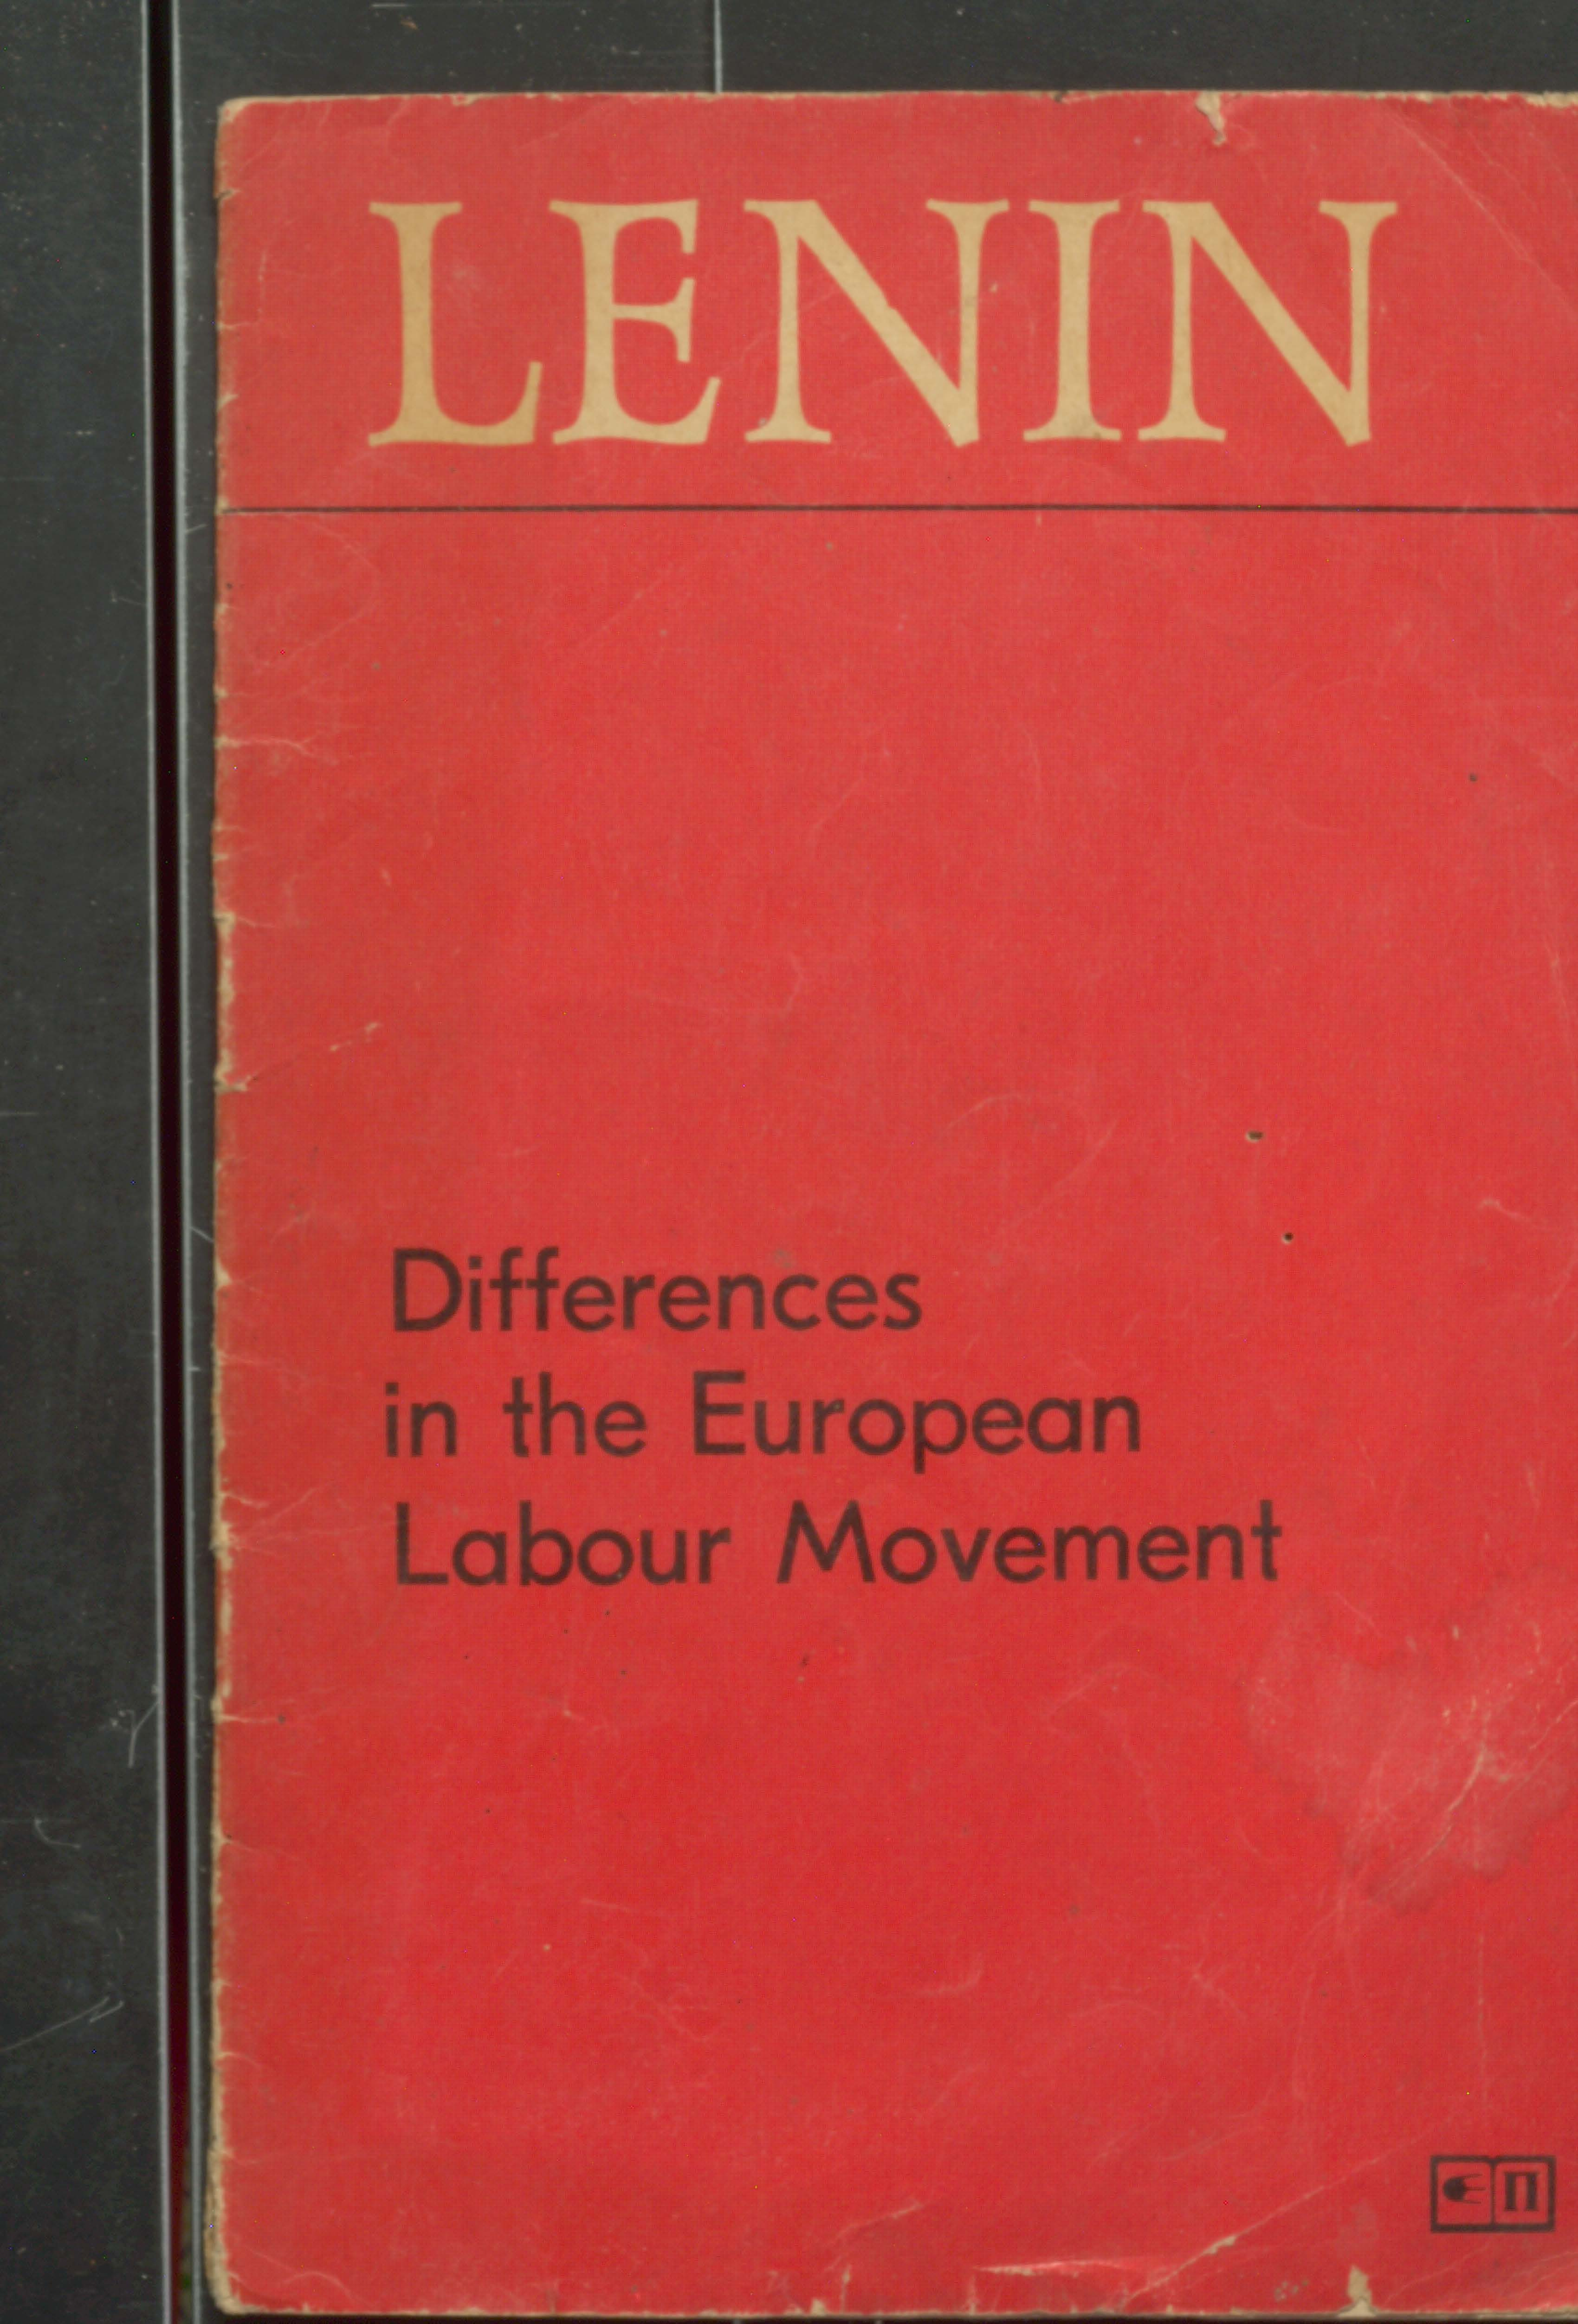 Lenin;Differences in the European Labour Movement